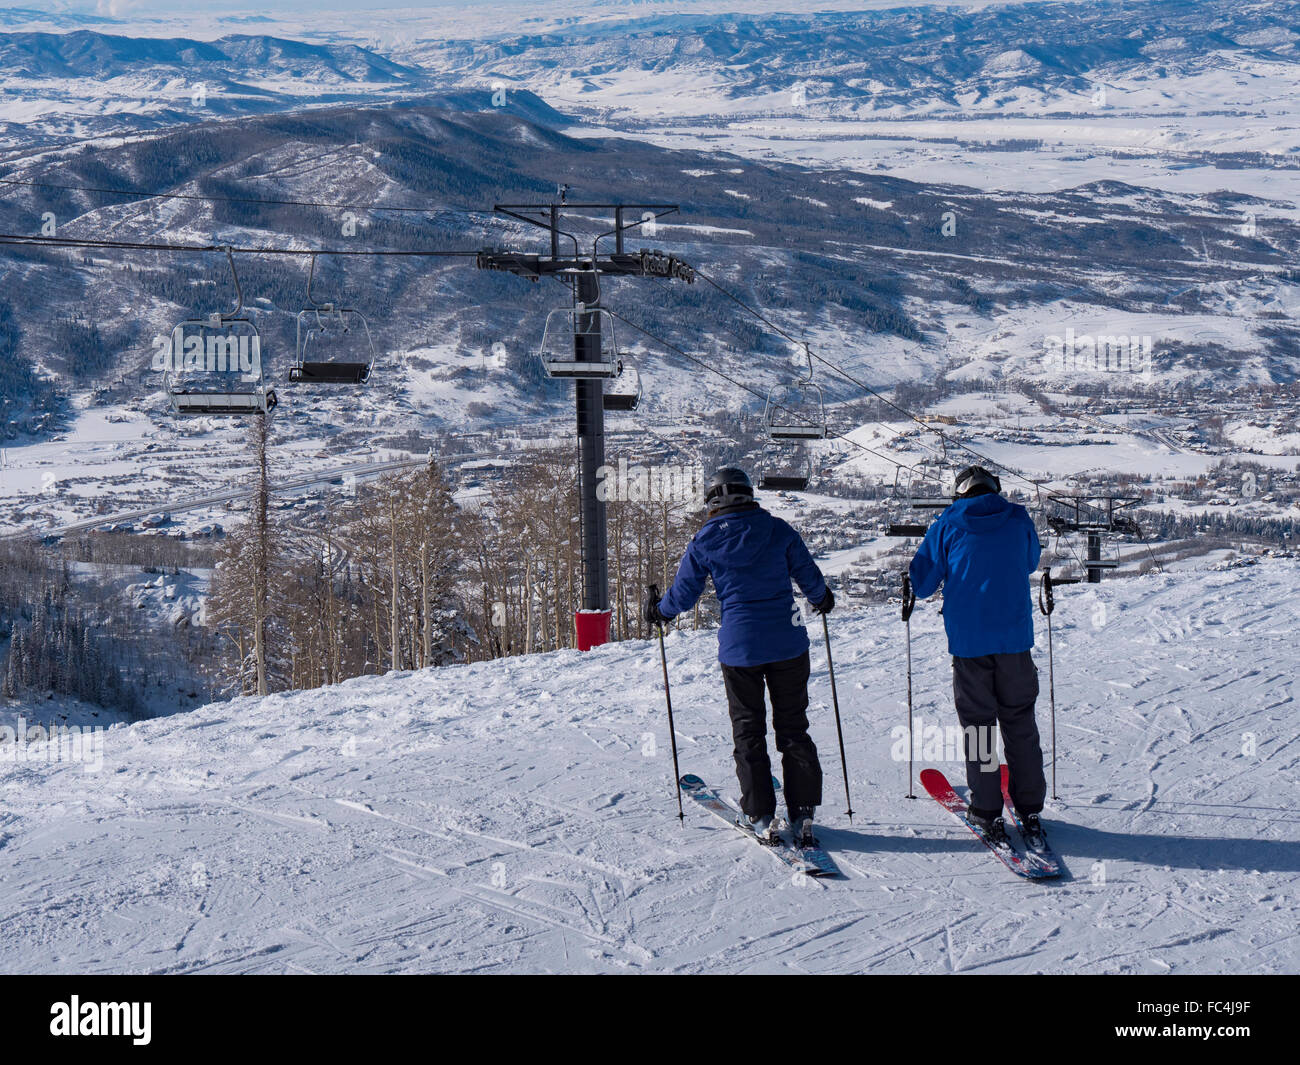 Skiers begin their descent from behind the Four Points Lodge, Steamboat Ski Resort, Steamboat Springs, Colorado. Stock Photo